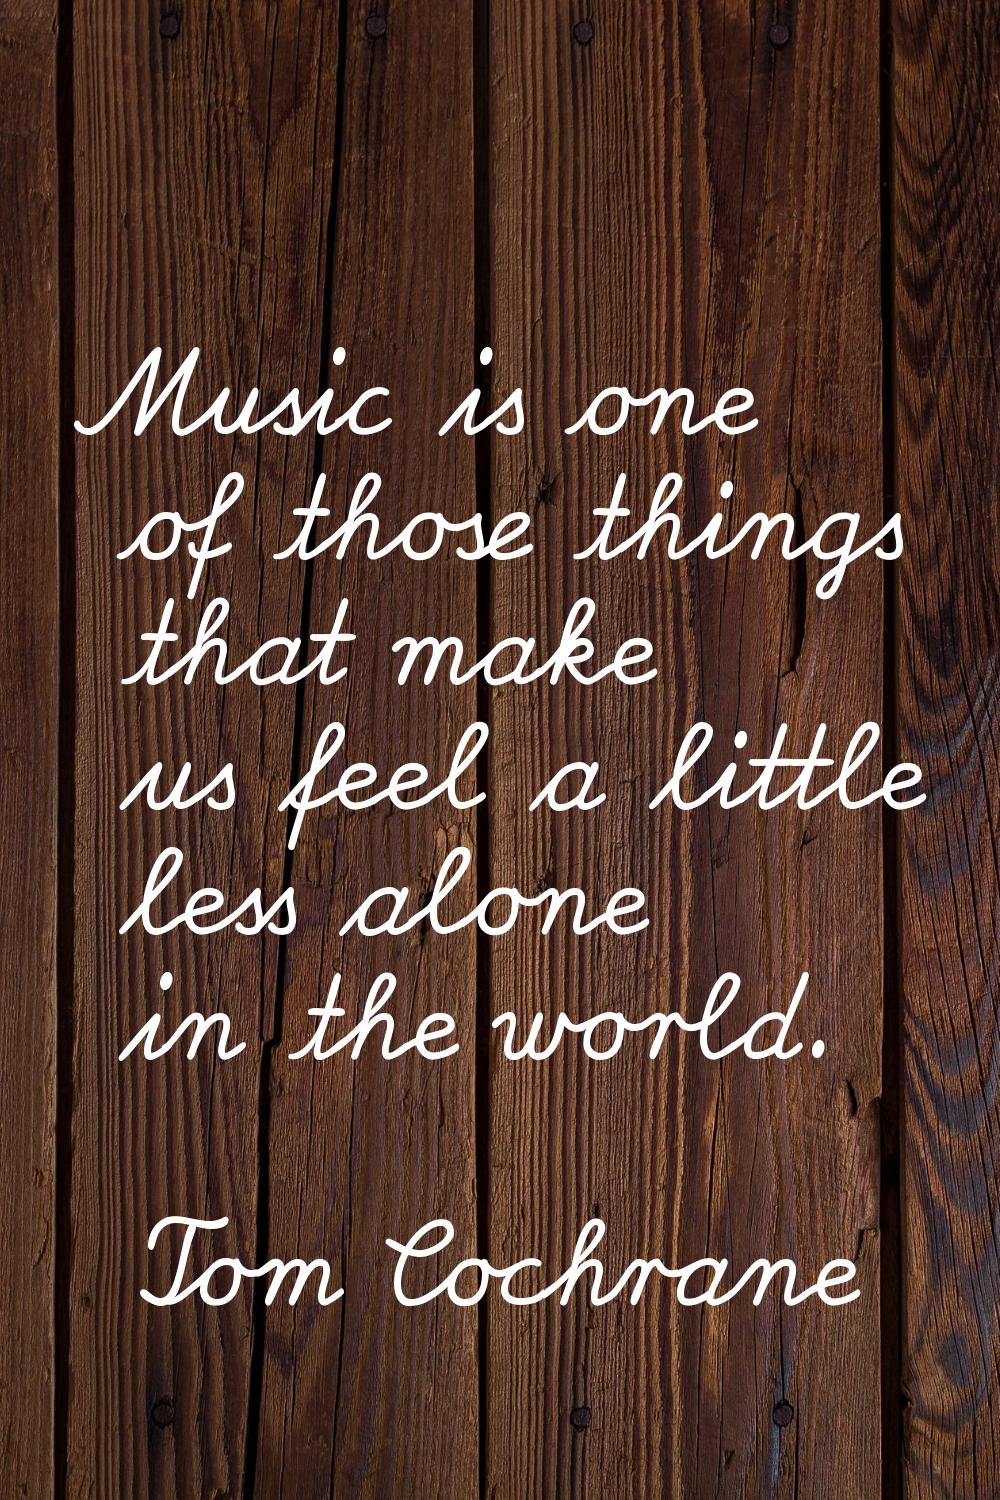 Music is one of those things that make us feel a little less alone in the world.